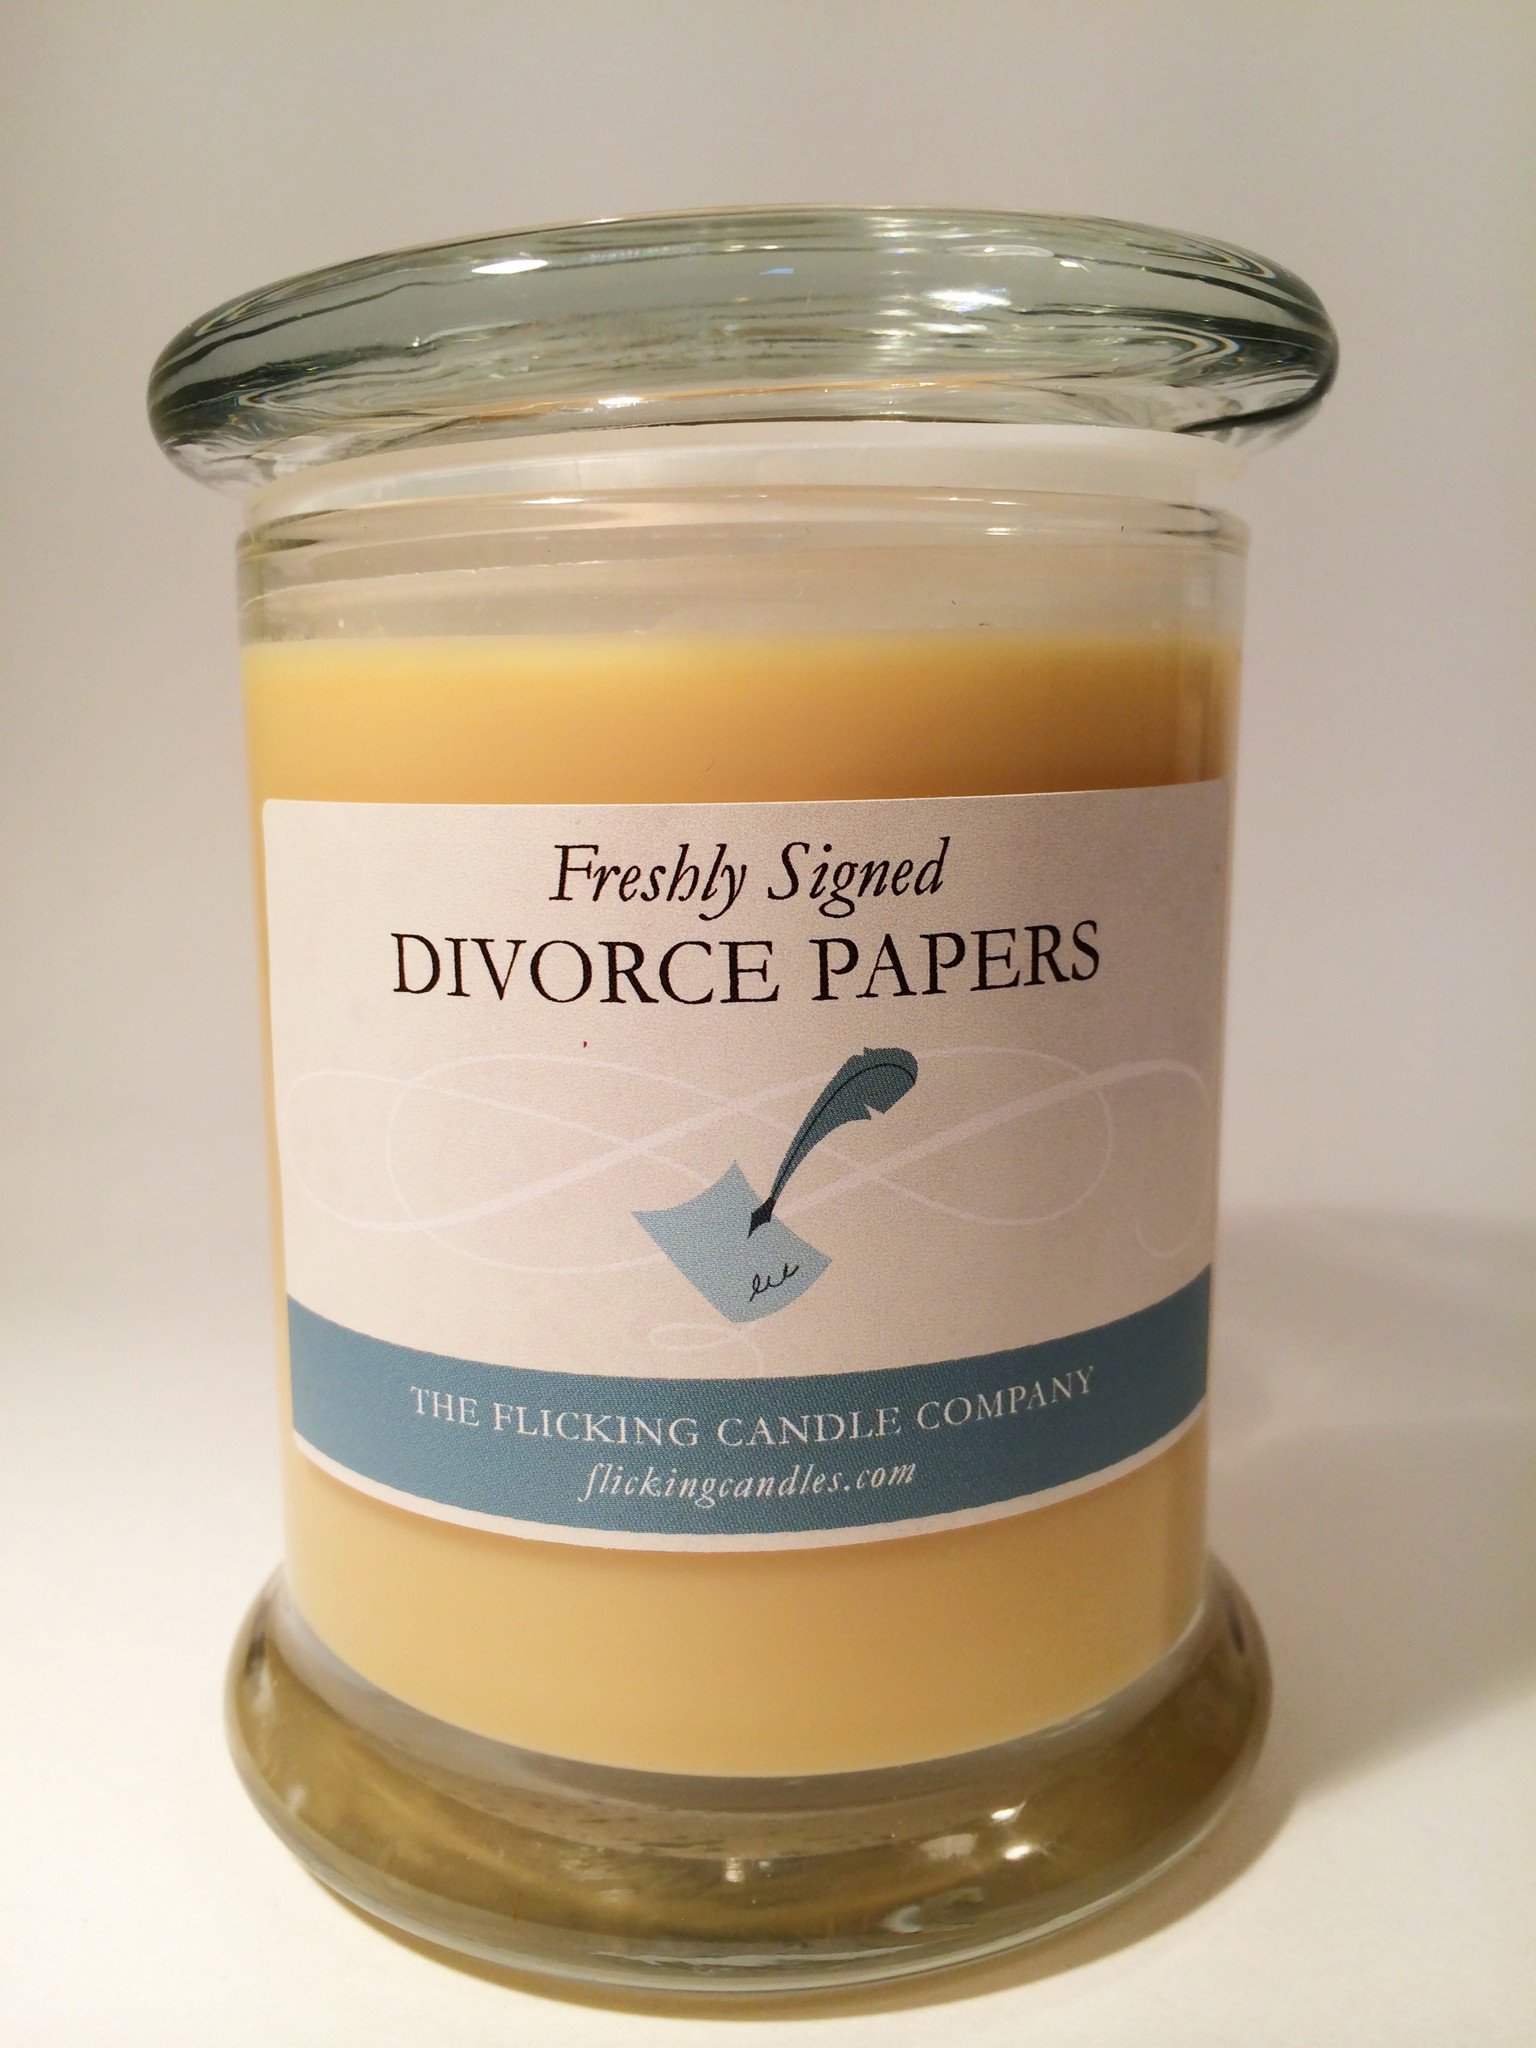 The greatest smell on earth: Freshly Signed Divorce Papers<br/><br/>This is going to run you about <a href="https://amzn.to/2I2bIpH">$17 on Amazon</a>.